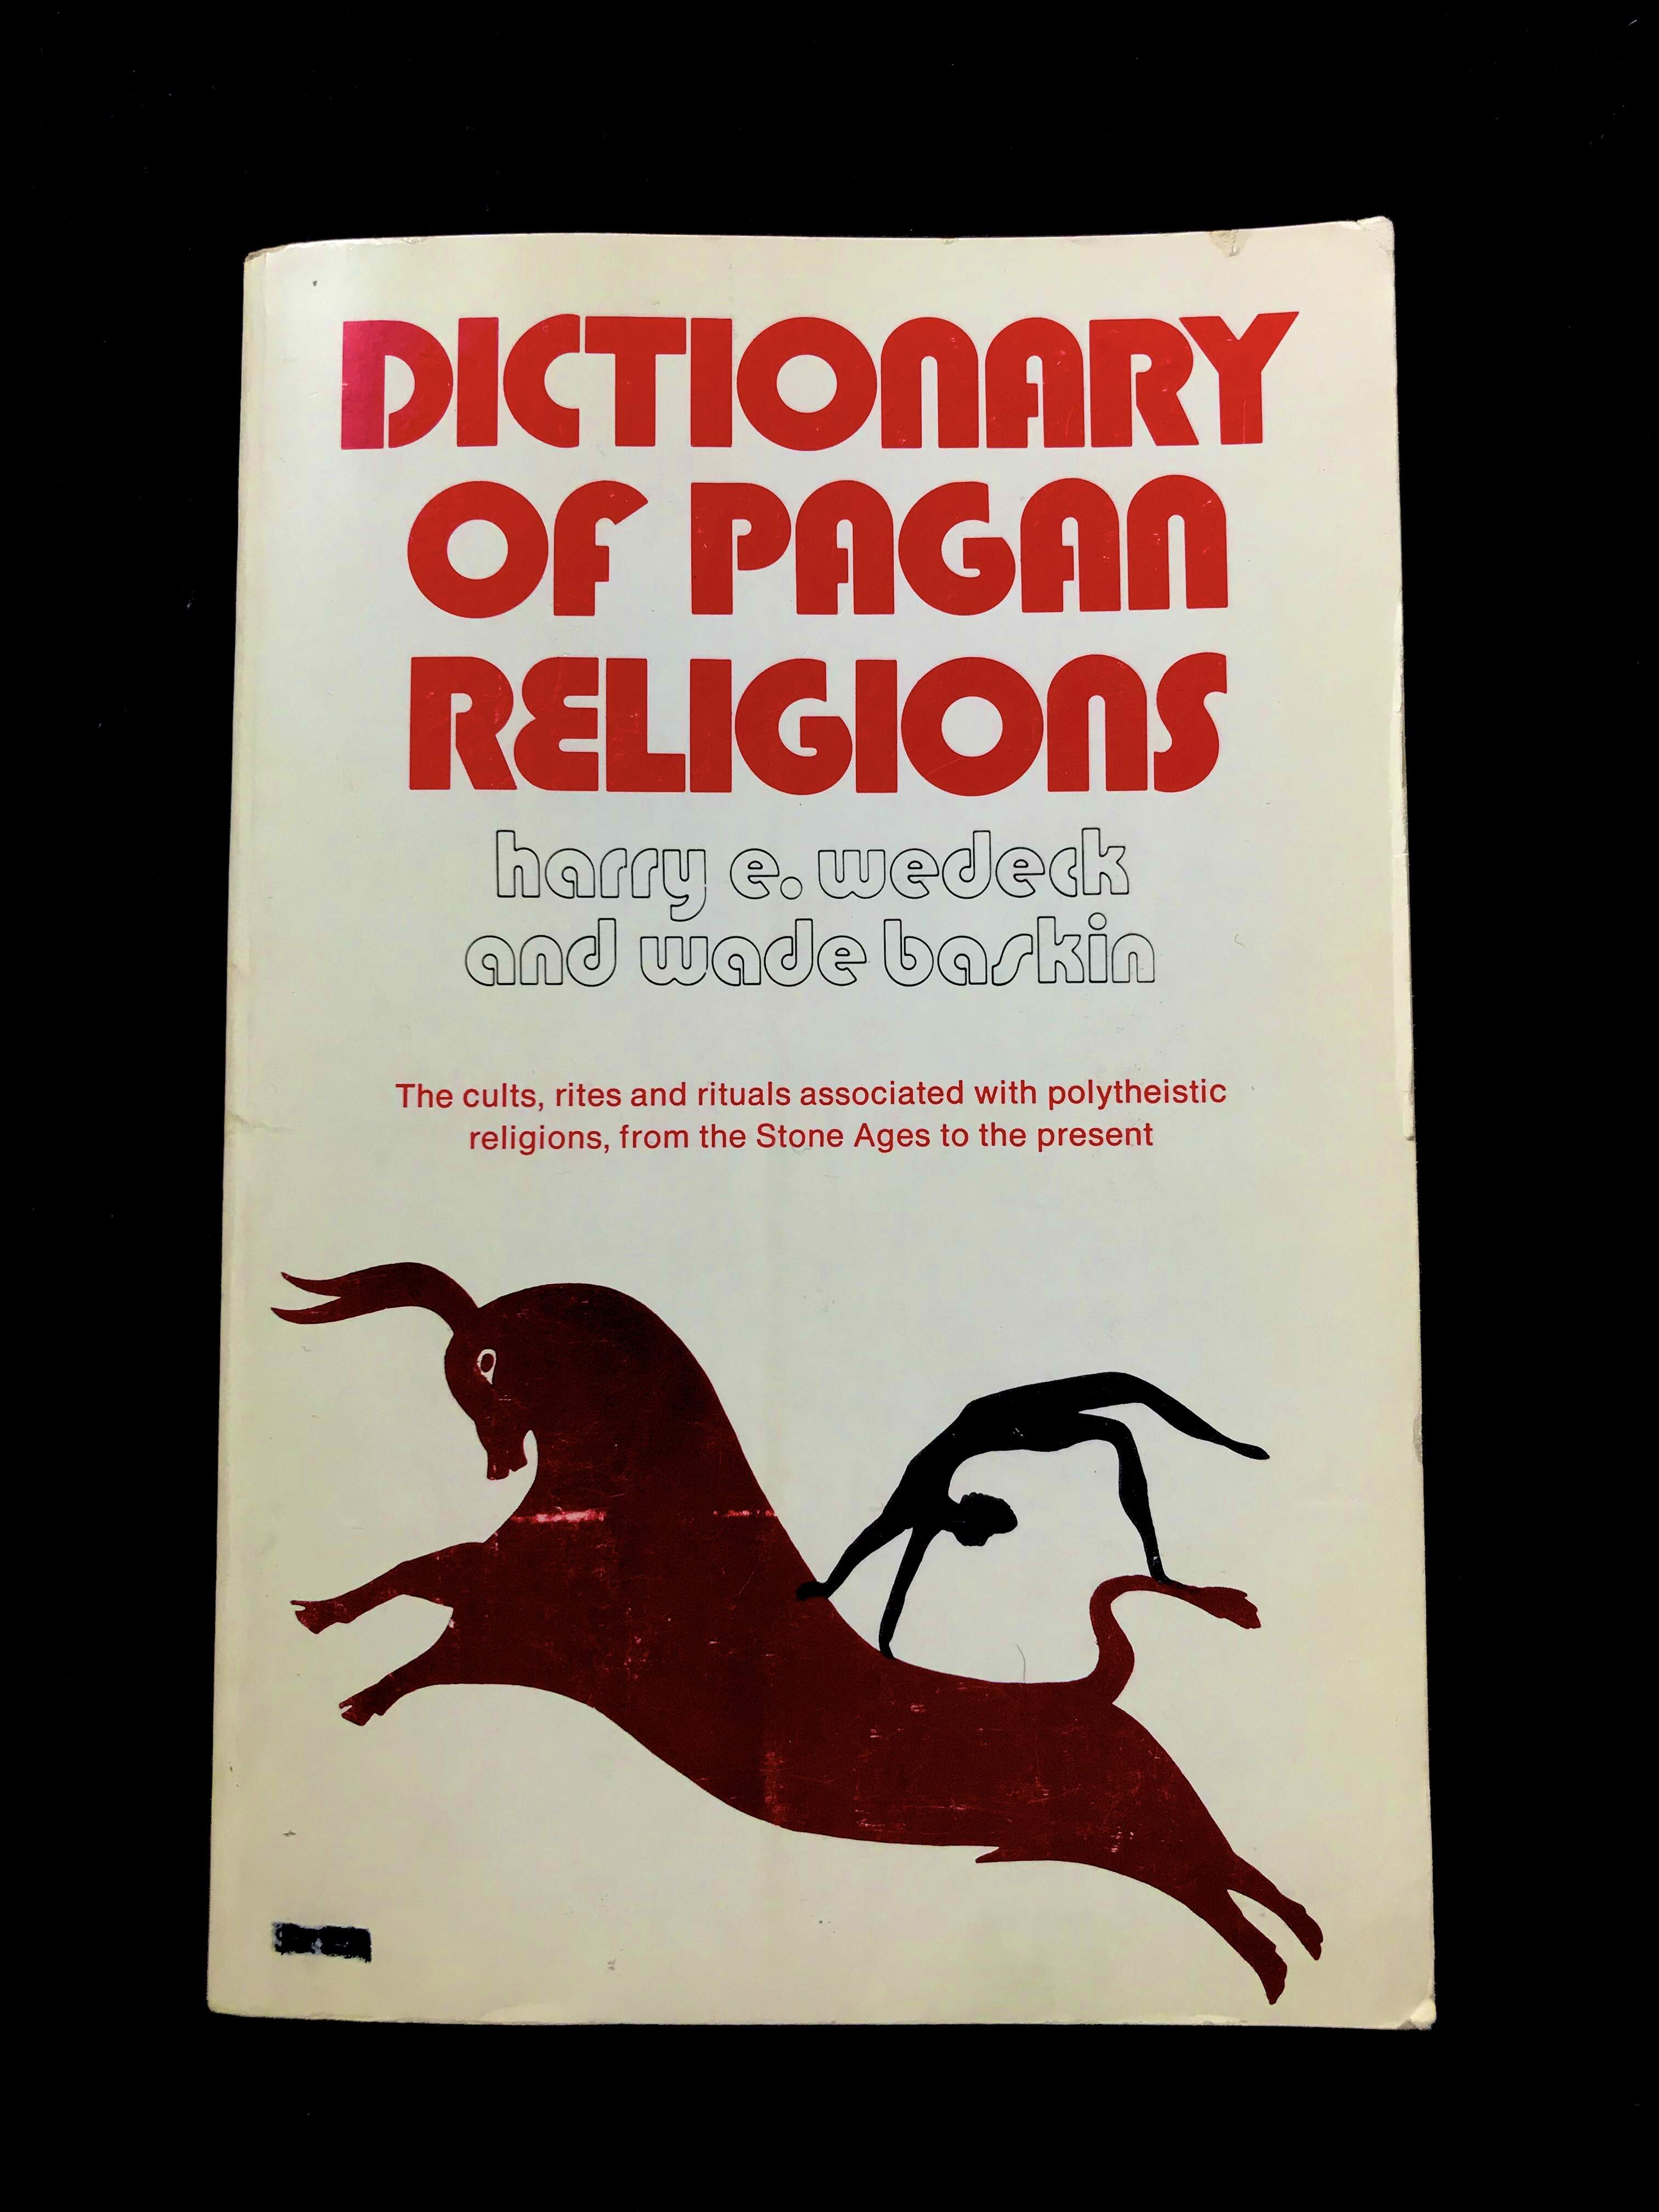 Dictionary of Pagan Religions by Harry E. Wedeck and Wade Baskin